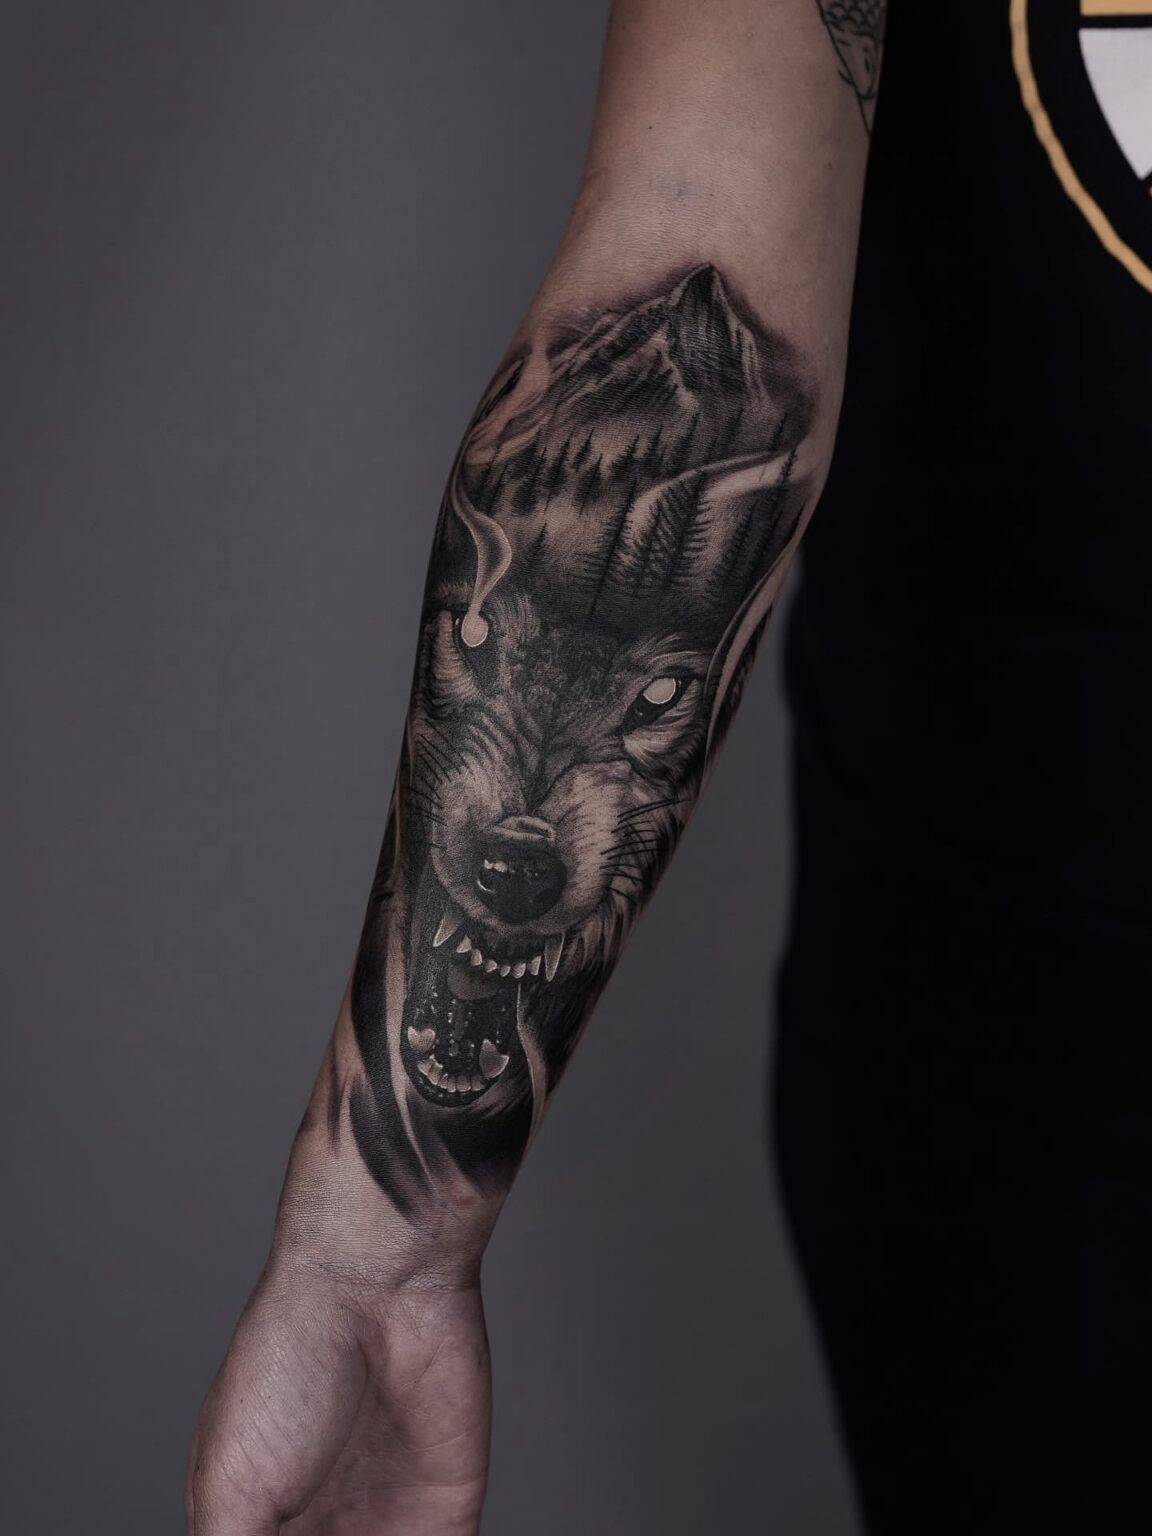 Majestic wolf tattoo surrounded by trees and mountains, evoking a sense of strength and natural beauty.